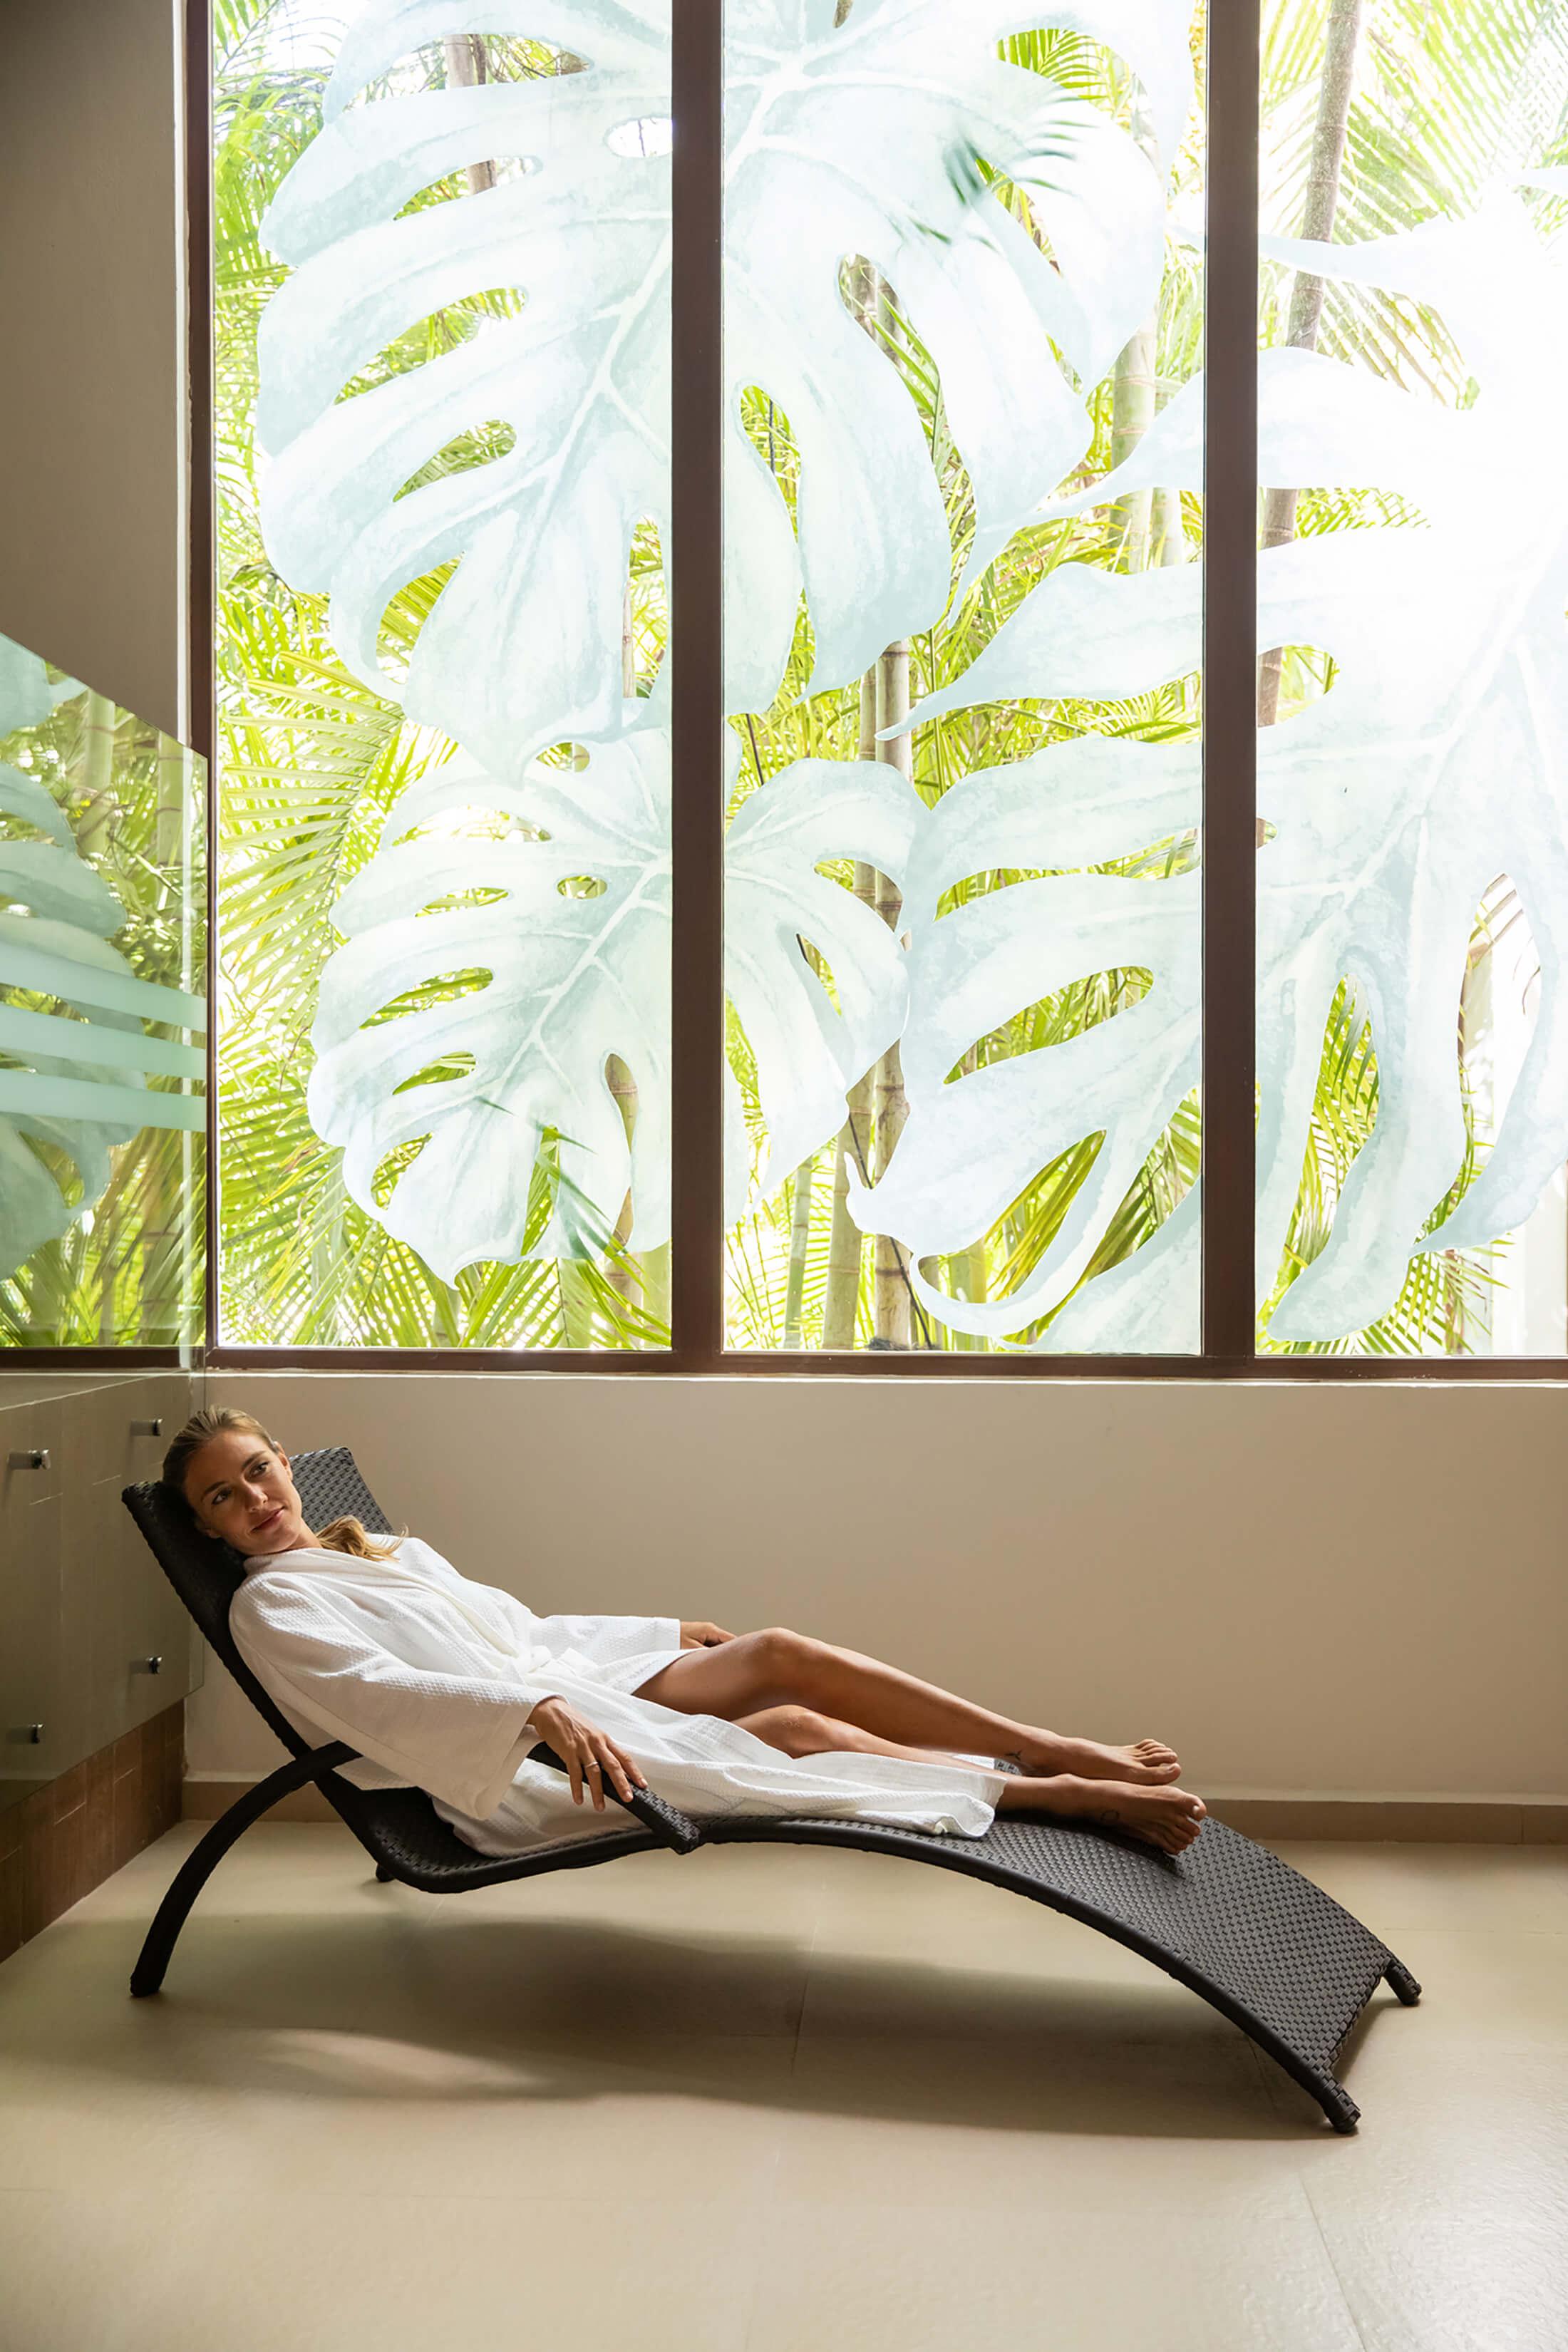 A woman relaxes at a spa